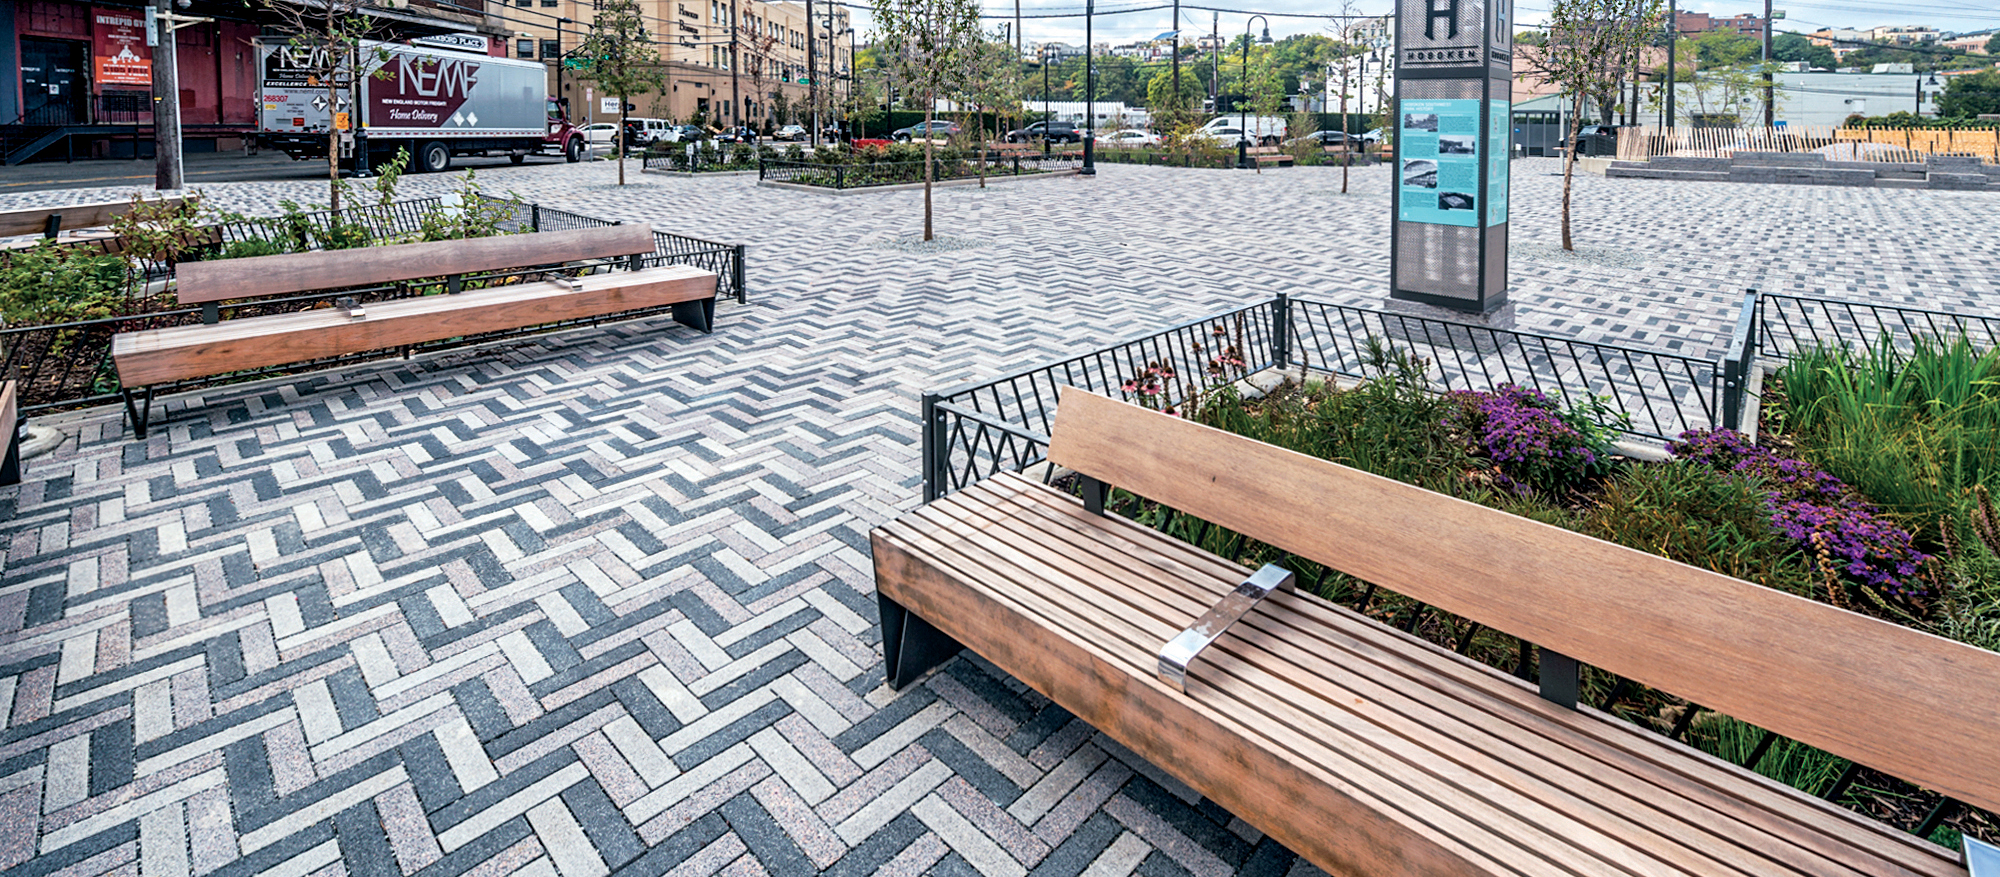 Tri-colored Eco-Promenade pavers provide visual flair when laid in a zigzag pattern, paired with surrounding garden beds and park benches.